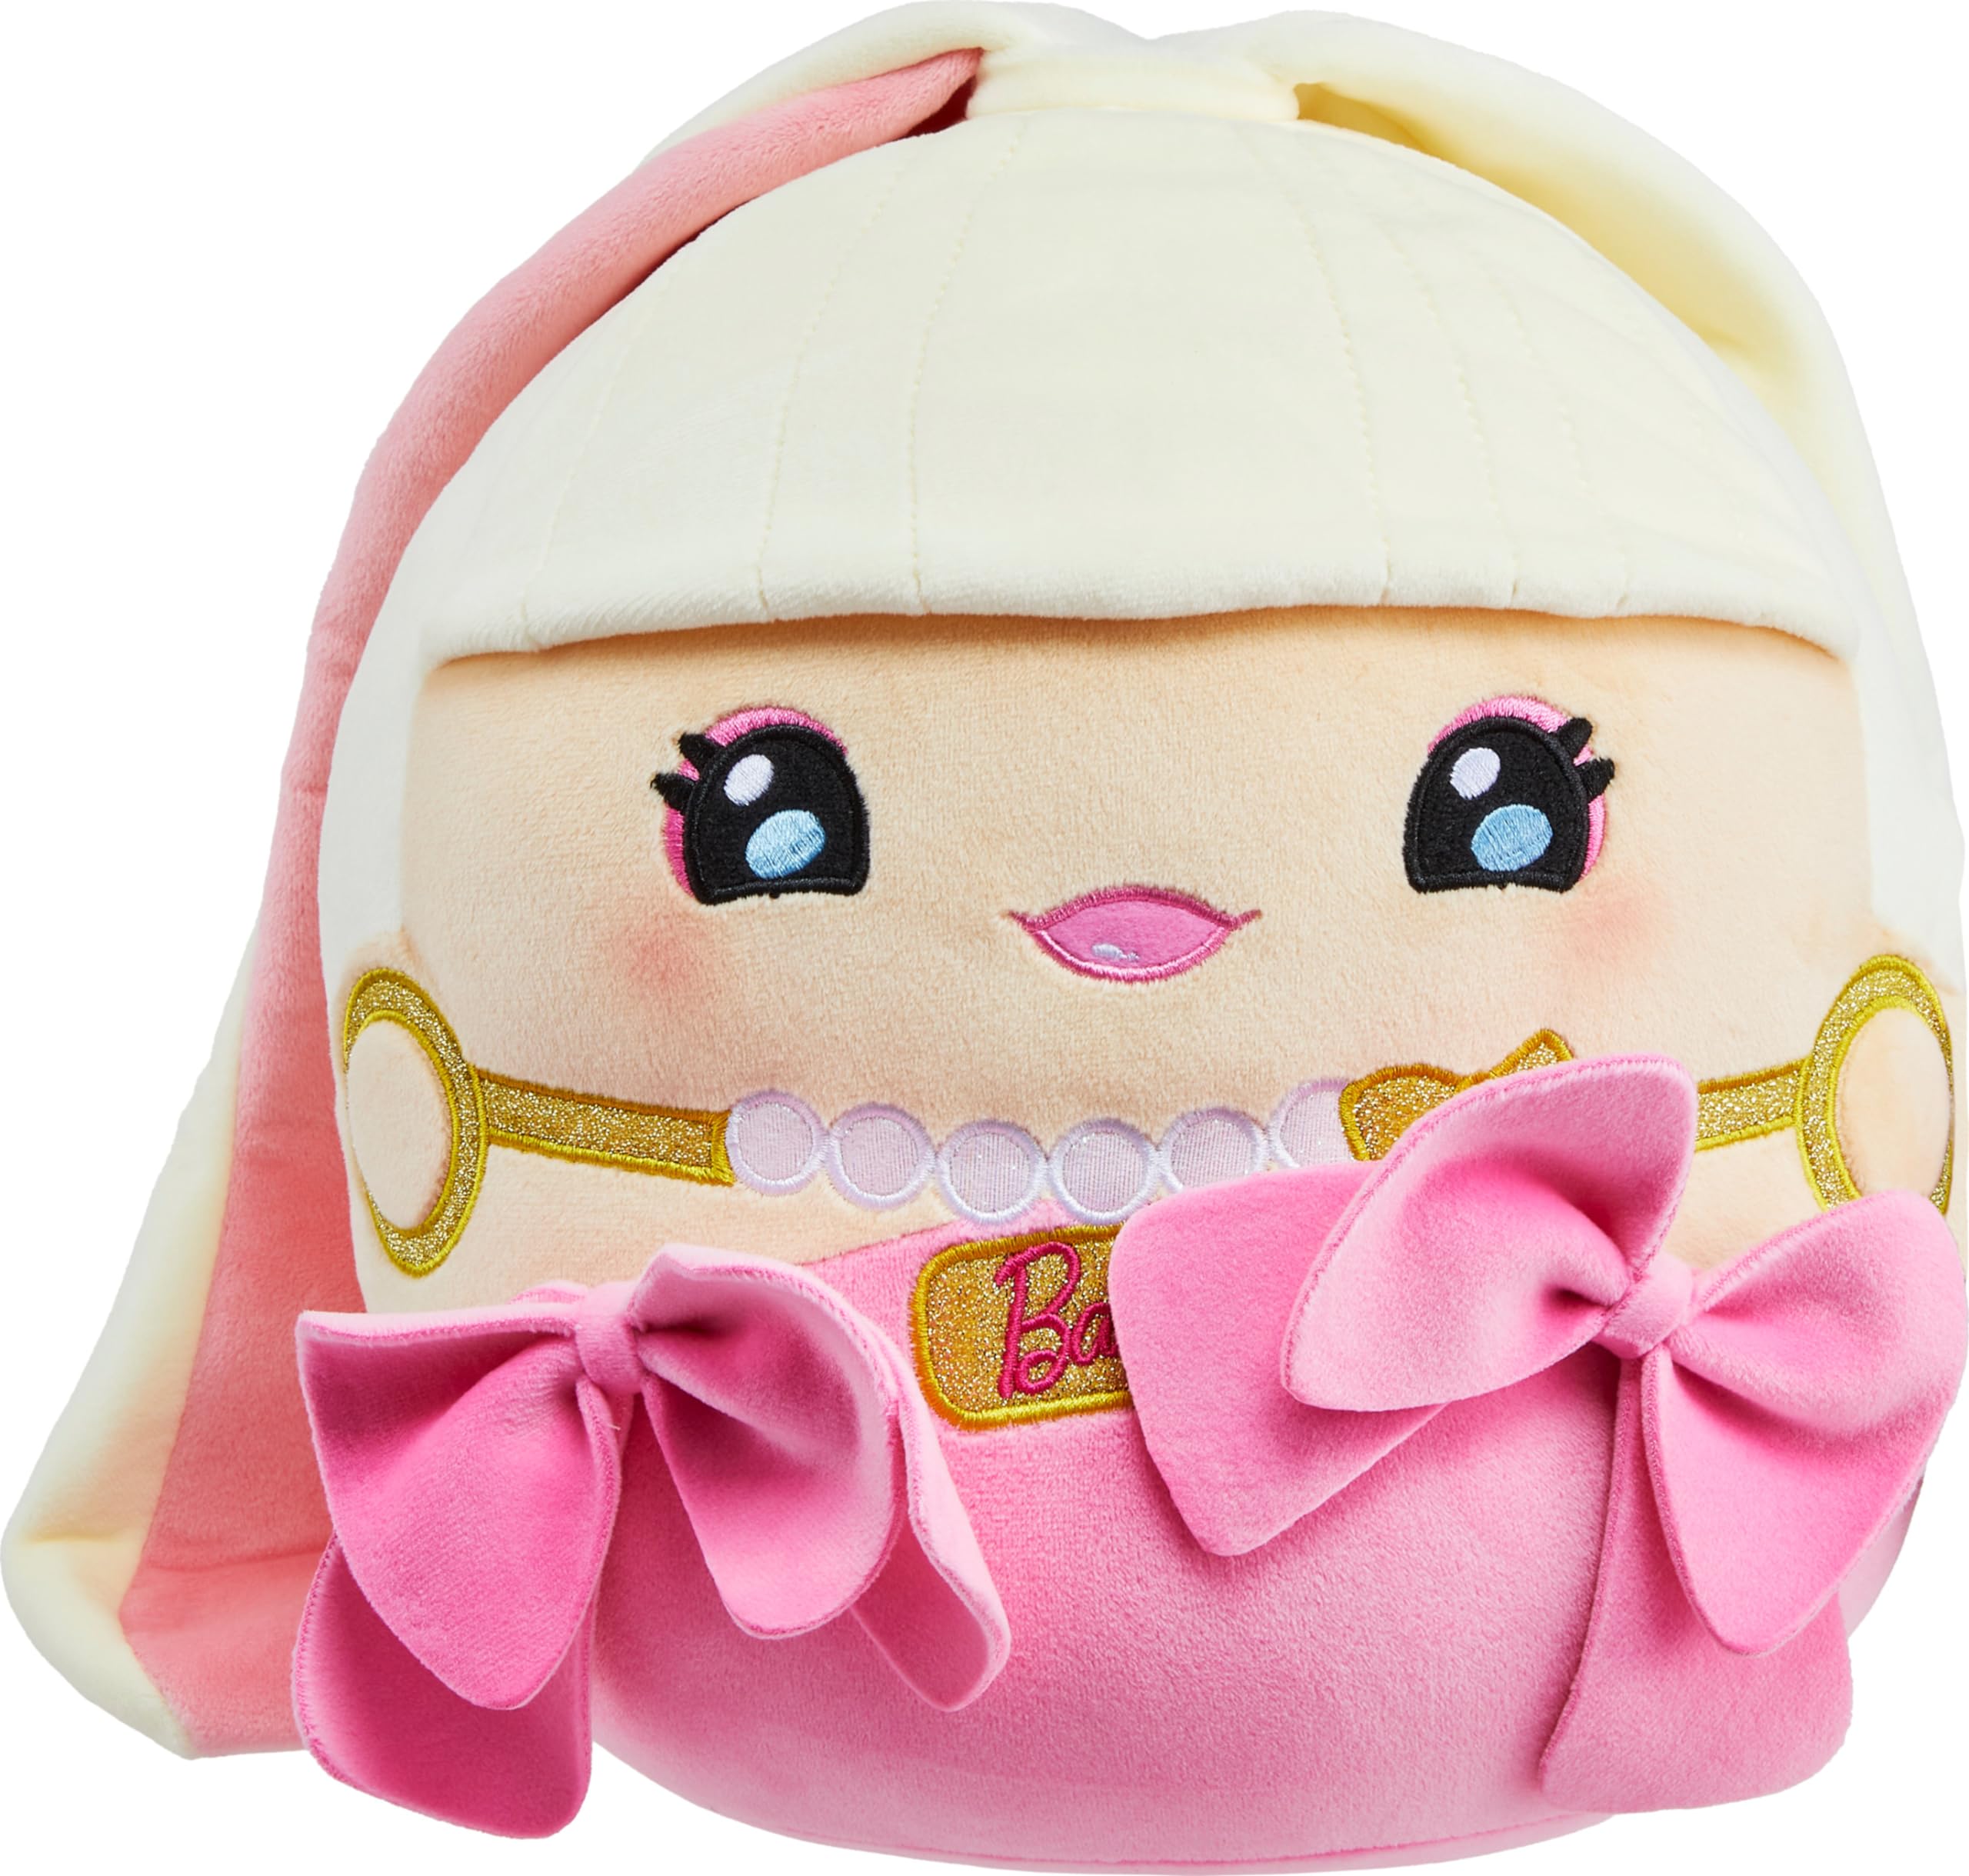 Barbie Cuutopia Plush 10-inch Soft Pillow Doll w/ Iconic Look